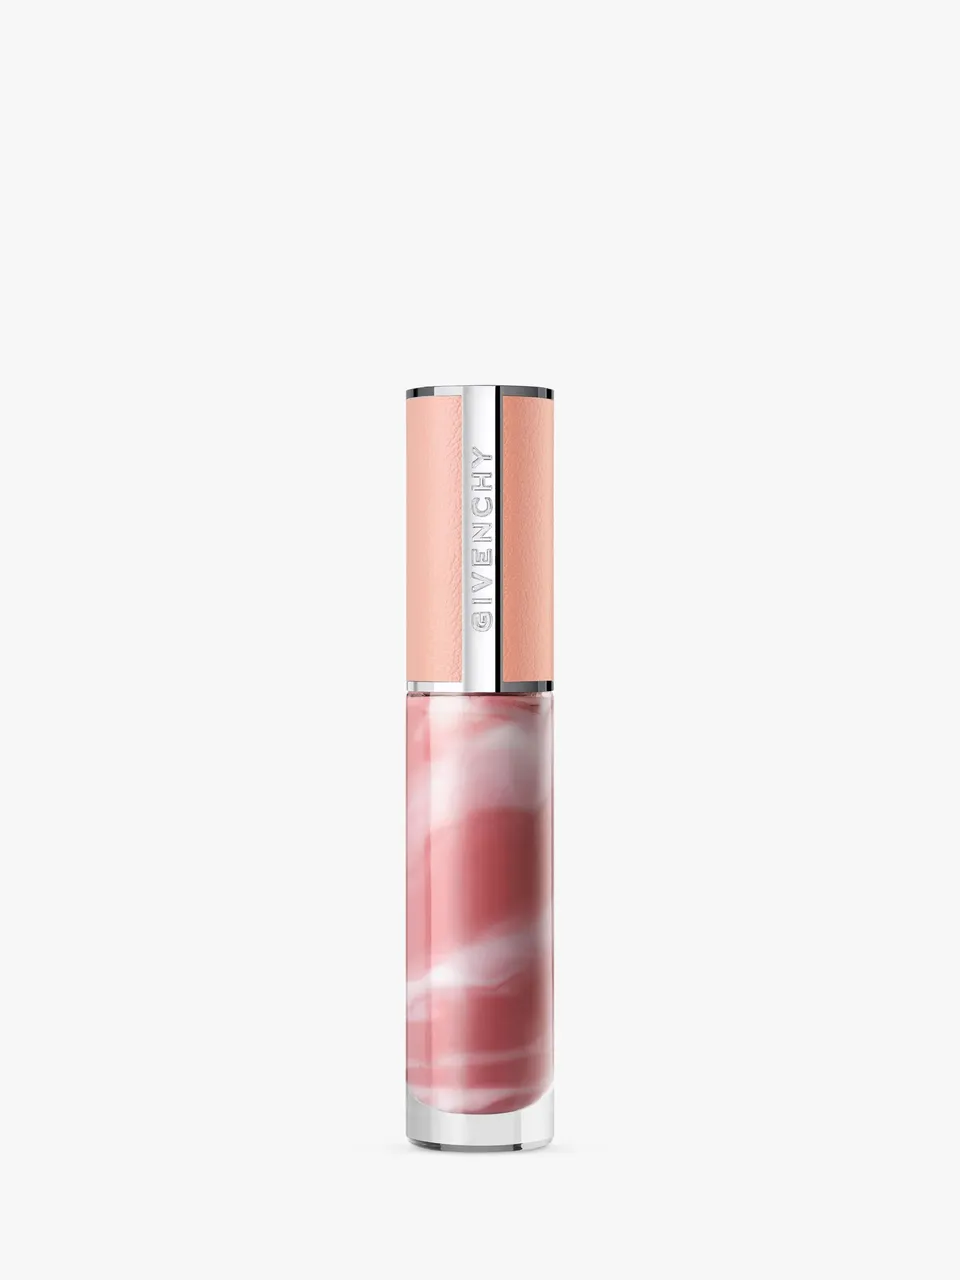 Givenchy Rose Perfecto Liquid Lip Balm - Pink Nude - Unisex - Size: 6ml